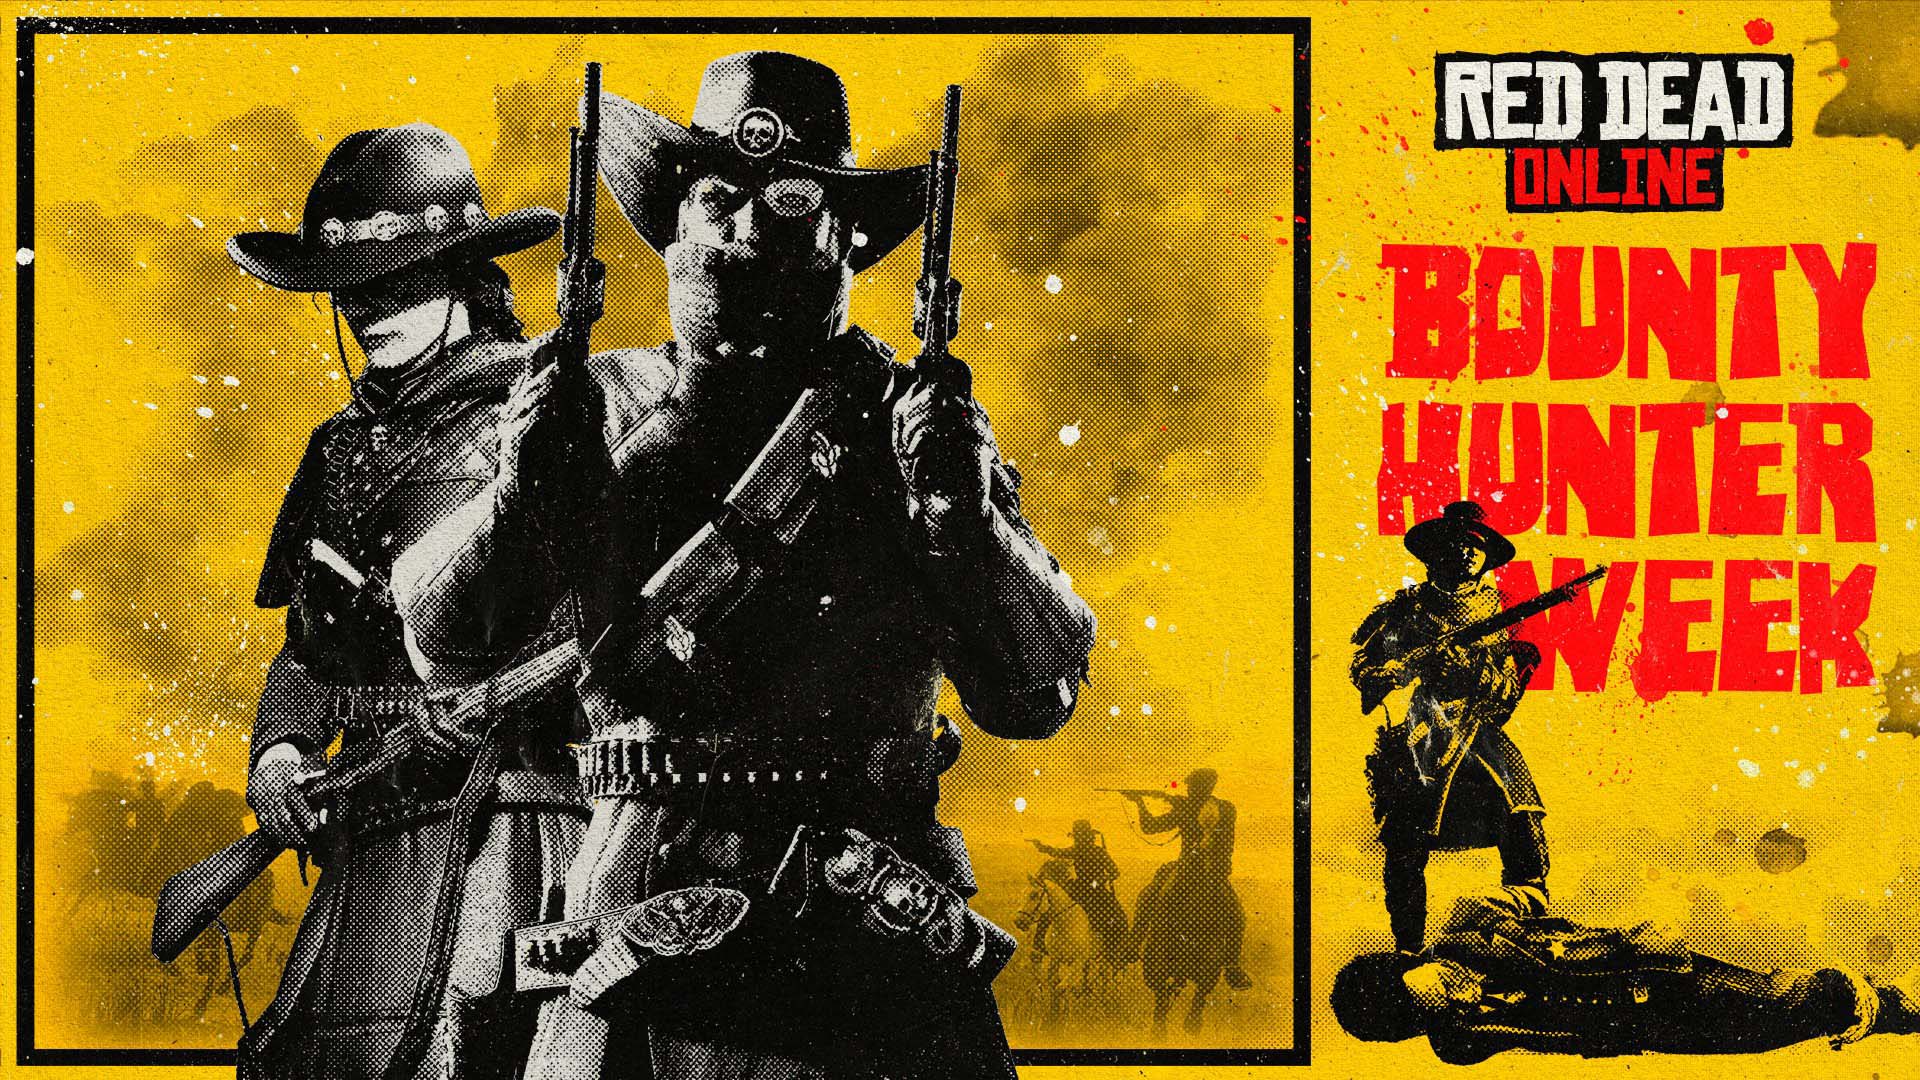 Red Dead Online Bonuses for Bounty Hunters, Last Days for The Quick Draw Club 4 &amp; more